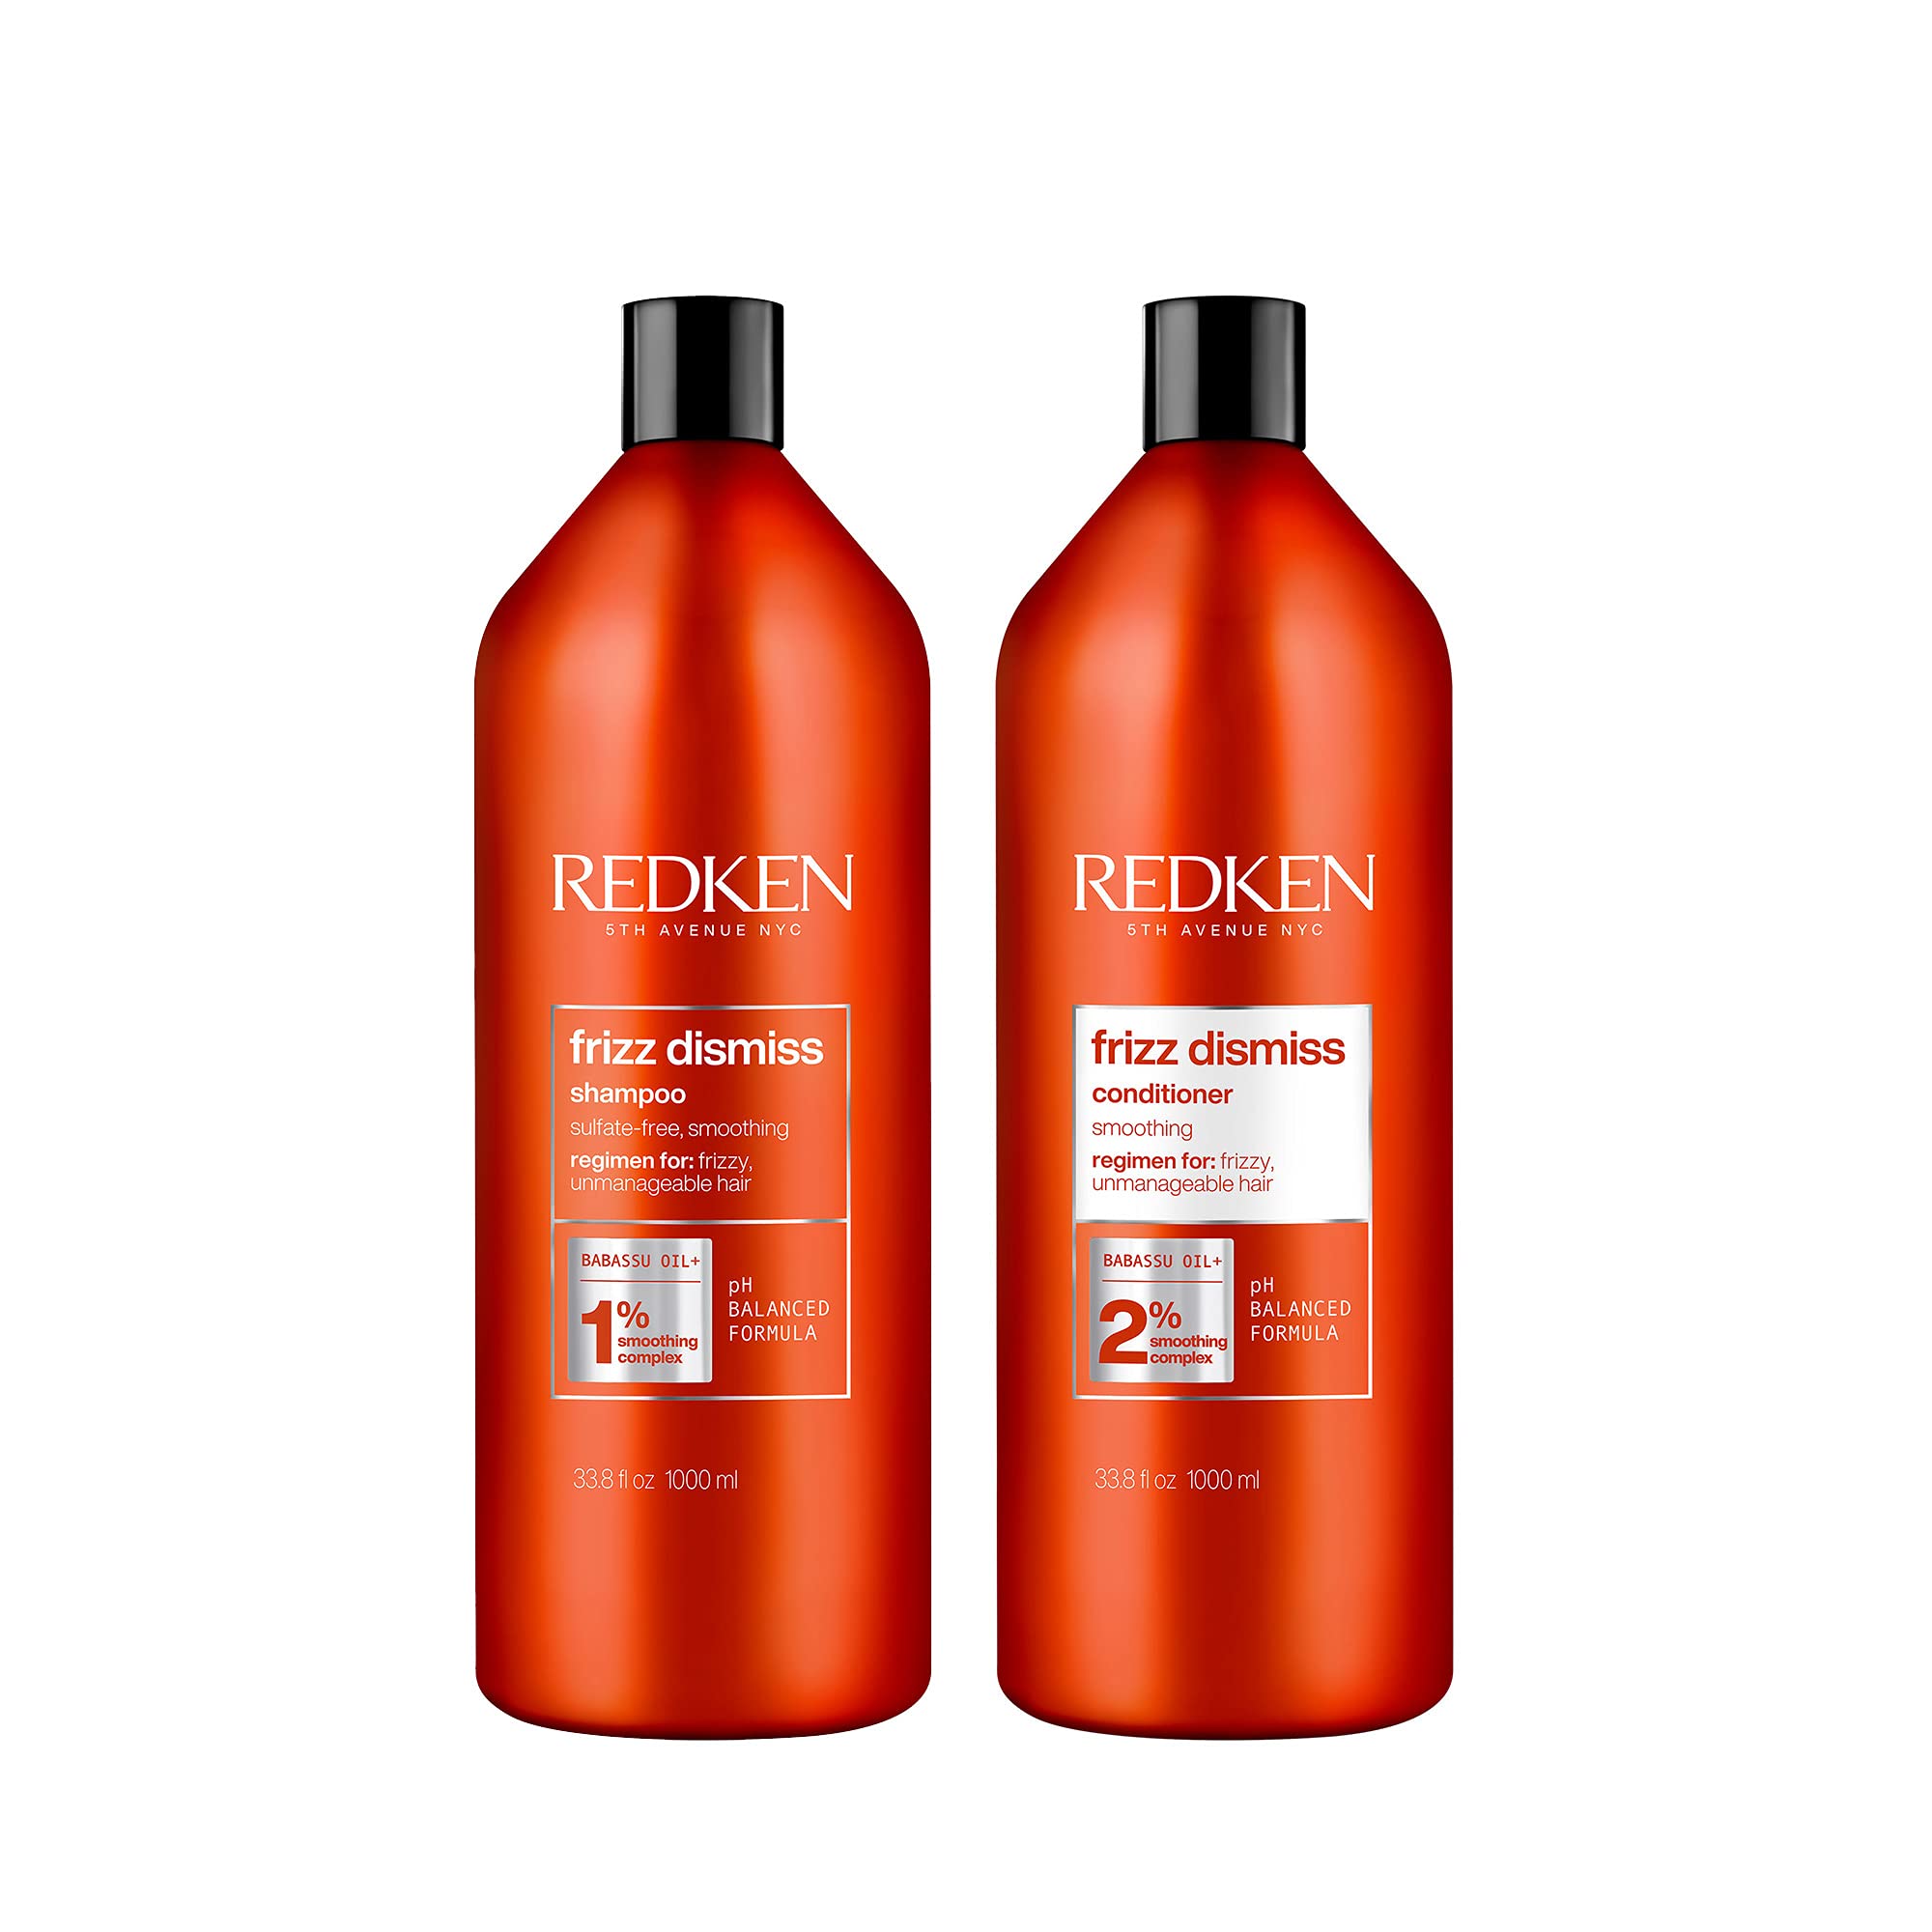 REDKEN Frizz Dismiss Shampoo & Conditioner Set | For Frizzy Hair | Smooths Hair & Manages Frizz | Sulfate Free